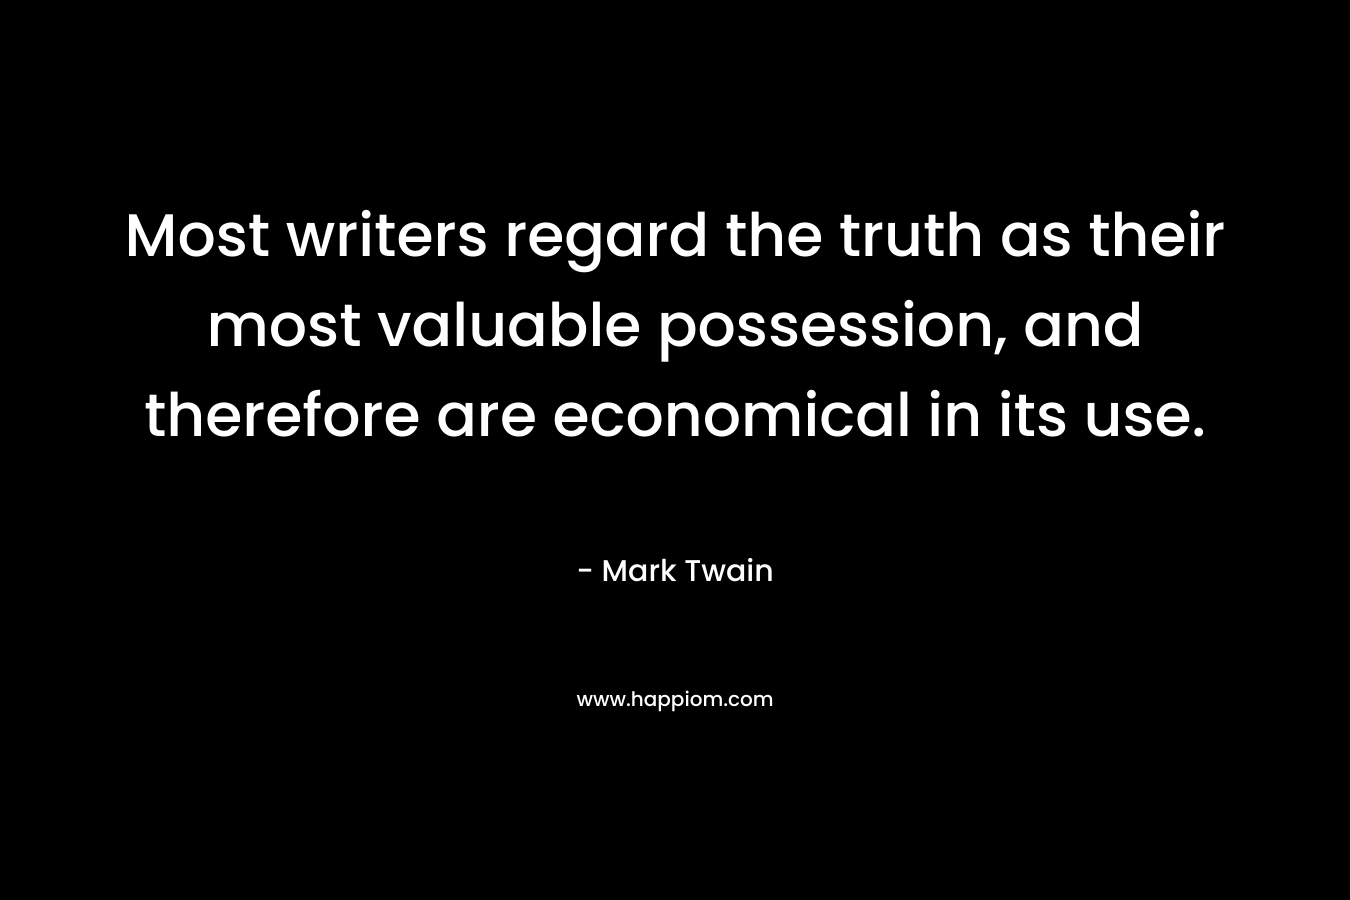 Most writers regard the truth as their most valuable possession, and therefore are economical in its use.